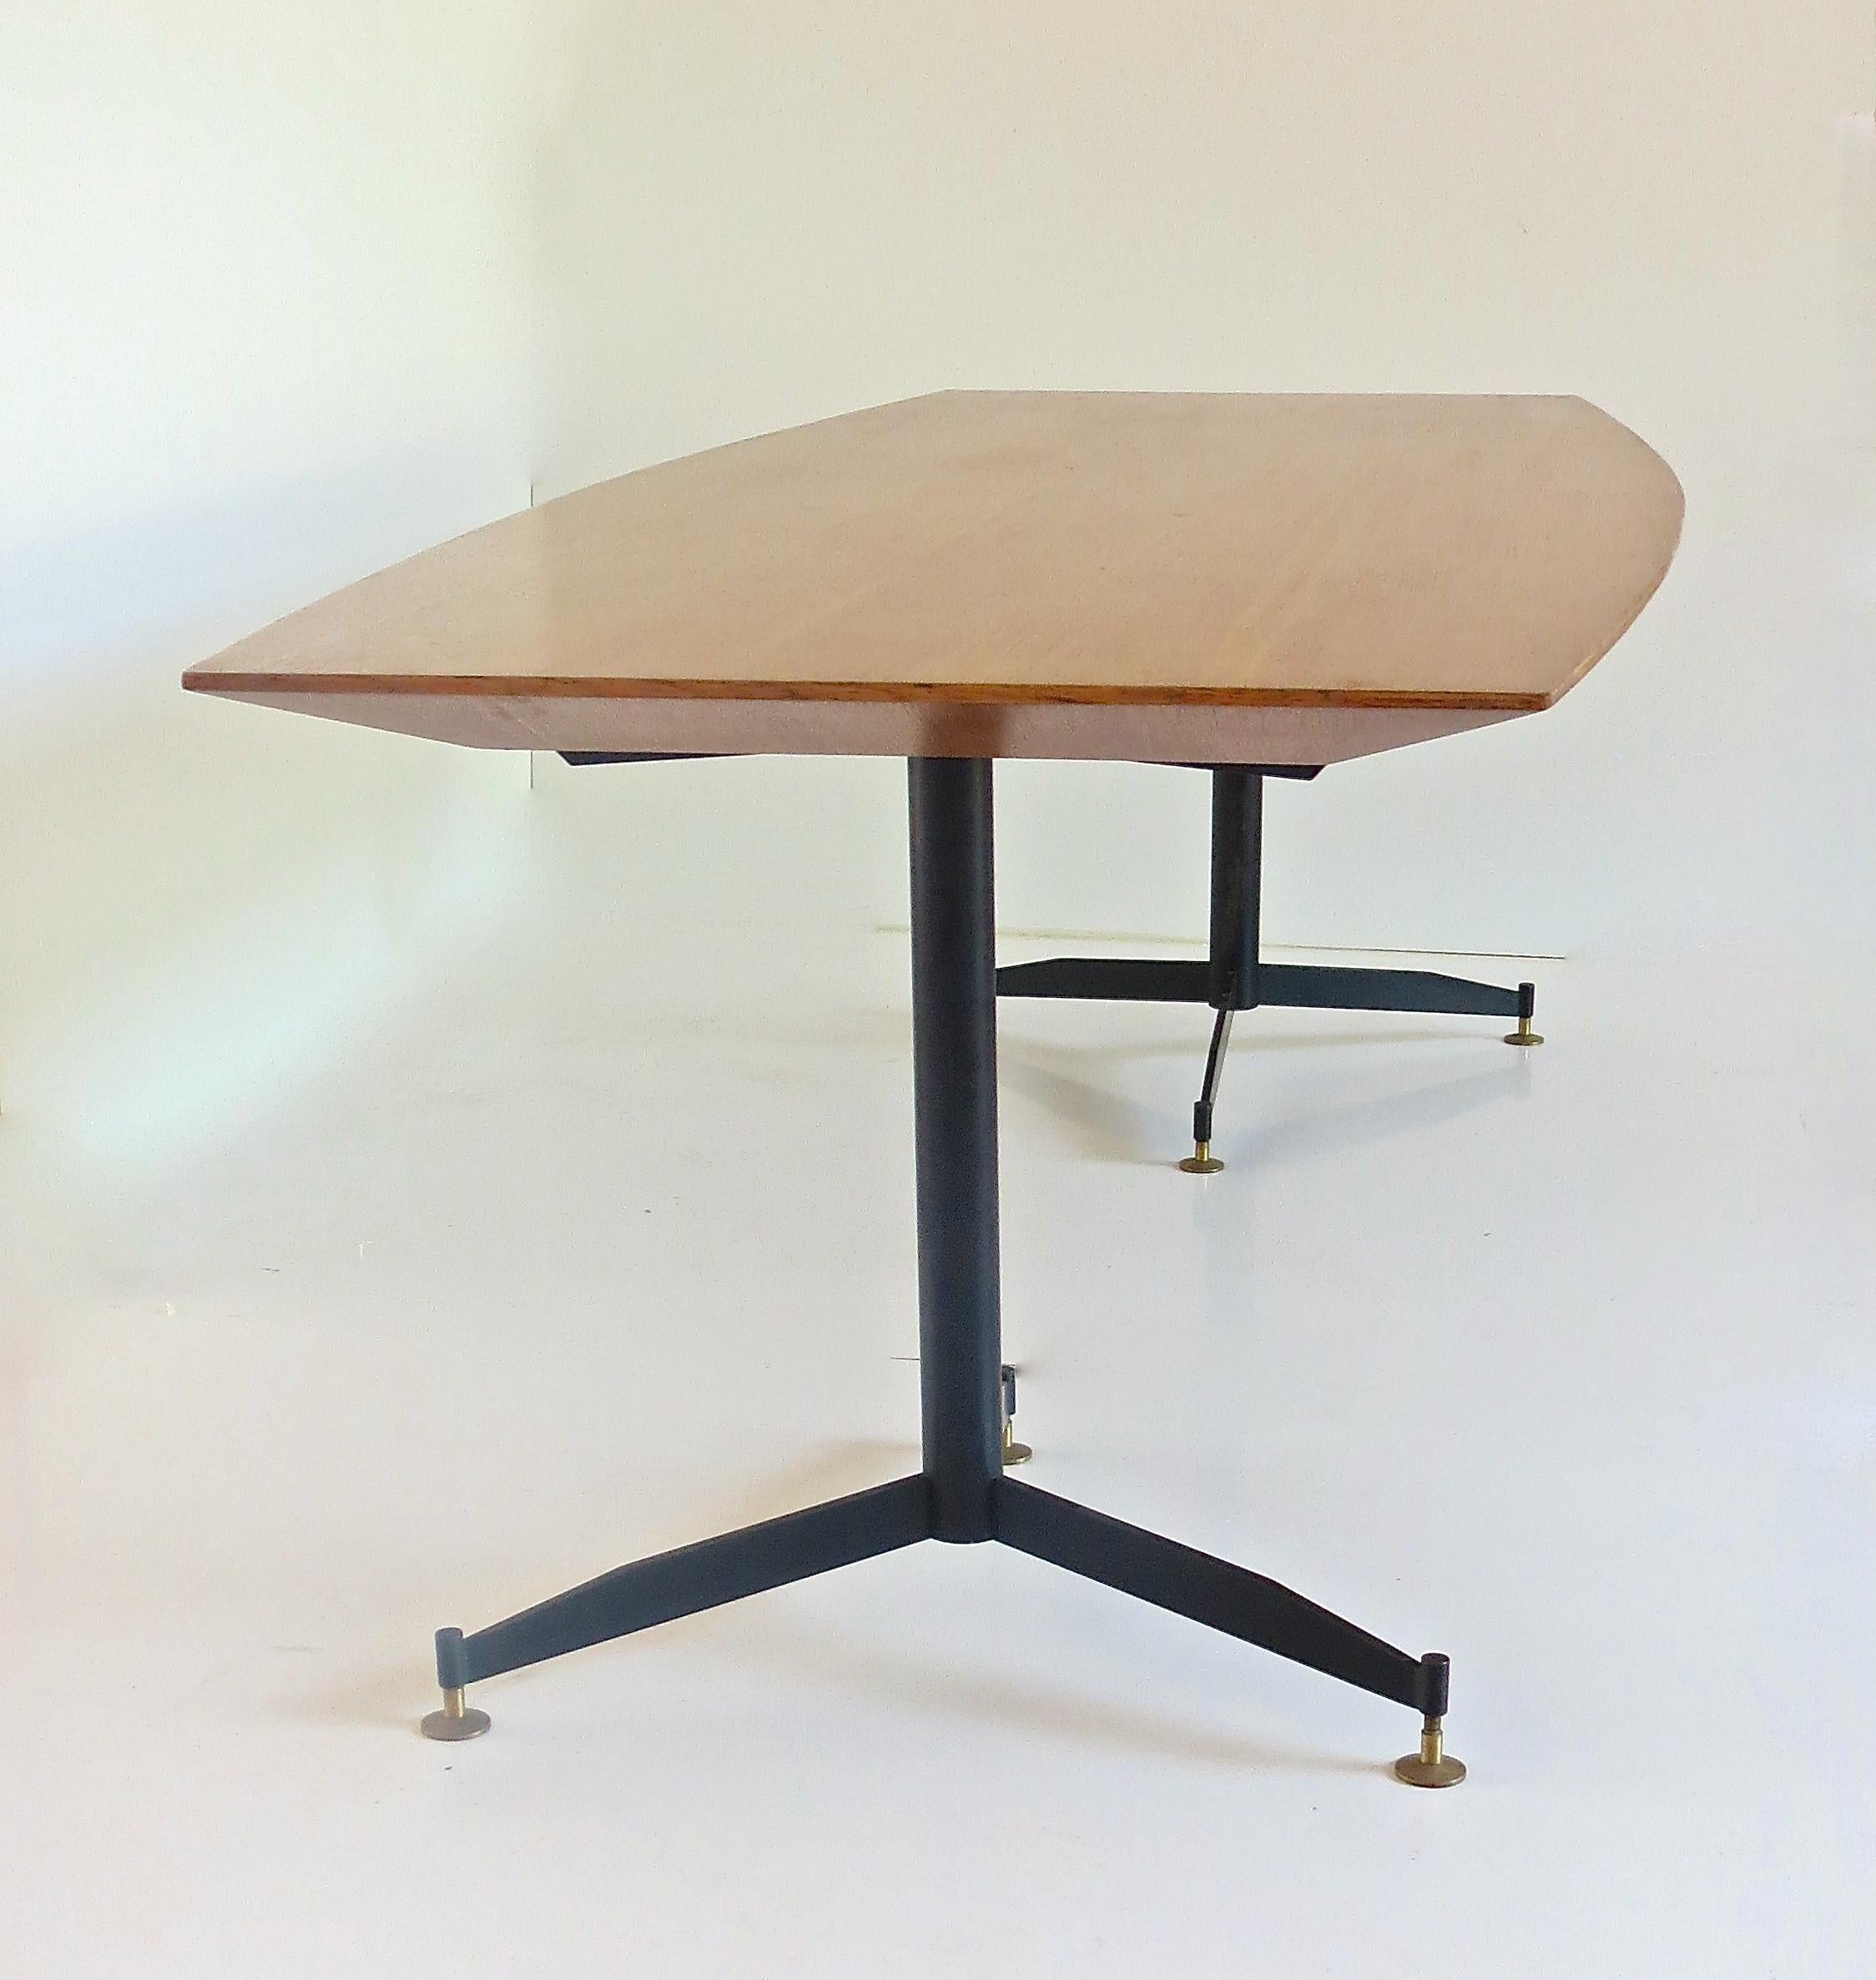 Important and impressive Gio Ponti big conference dining table 1961-1964

big diamond dining table from the Church San Francesco al Fopponino
Via Paolo Giovio Milan 1961-1964
likely an 